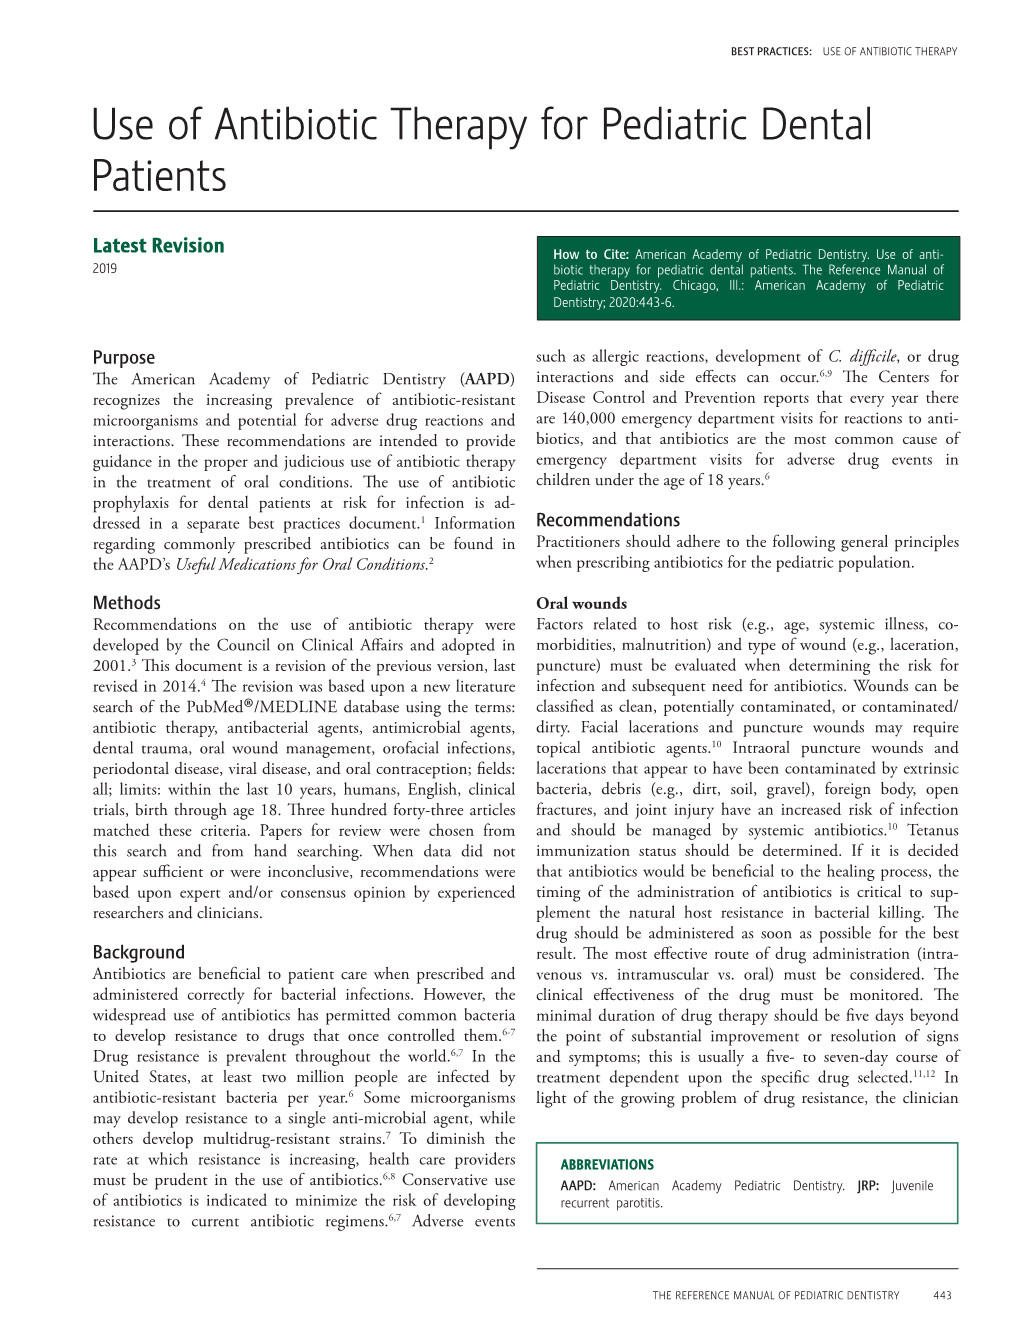 Use of Antibiotic Therapy for Pediatric Dental Patients